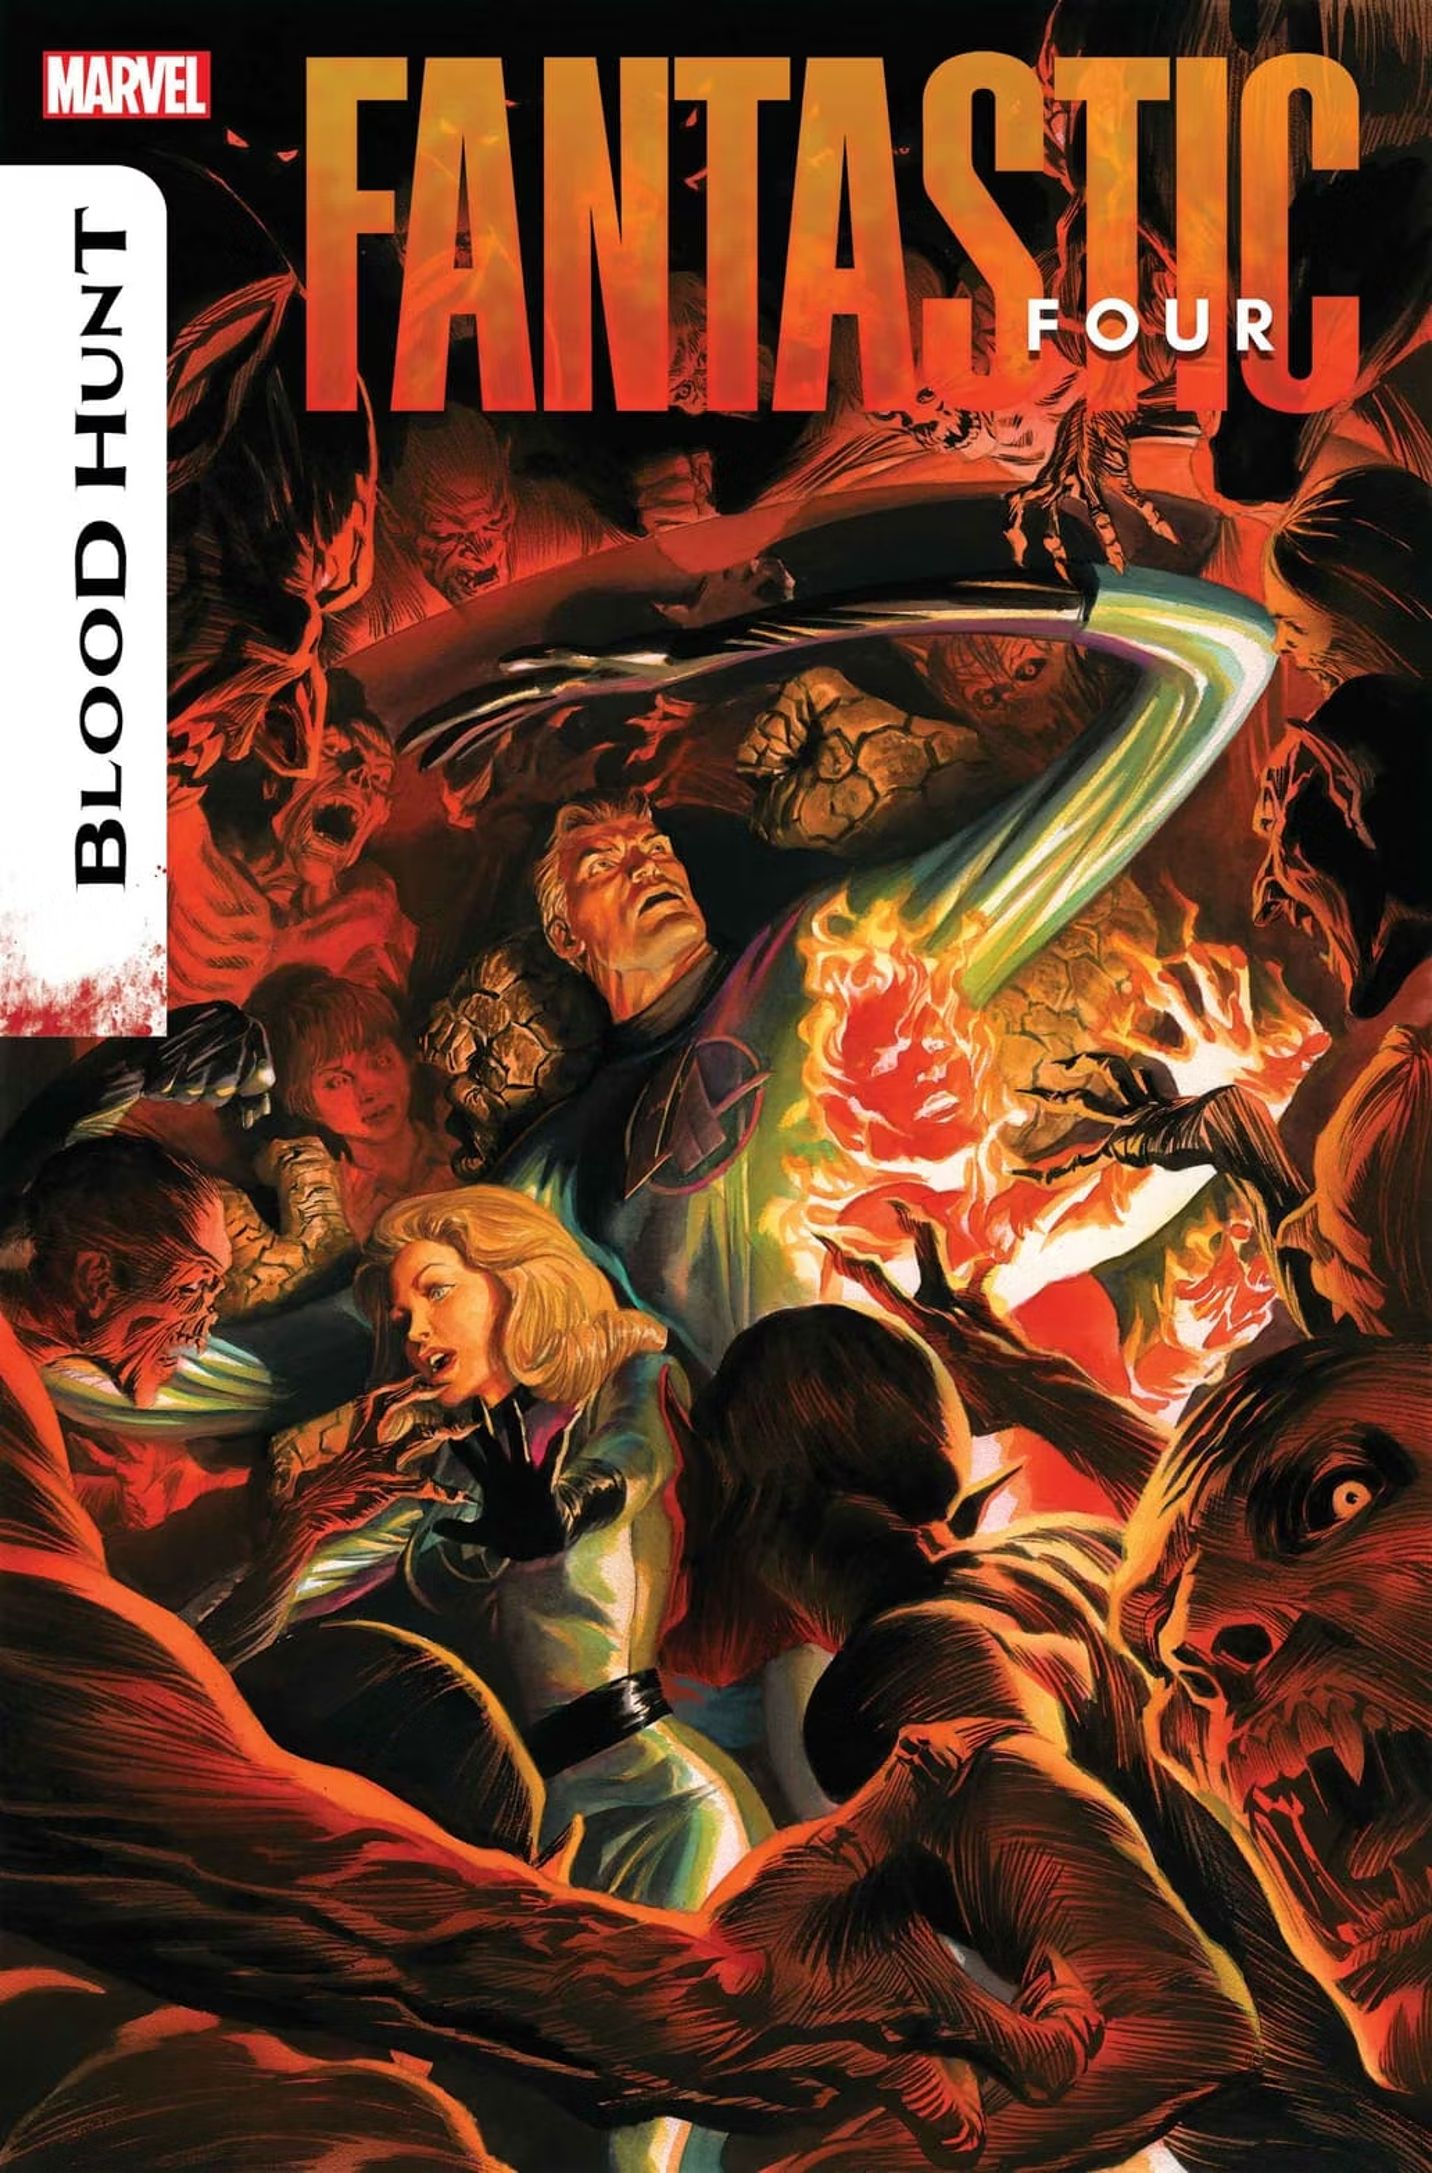 Fantastic Four #21 Blood Hunt cover by Alex Ross, featuring vampires surrounding the Four.